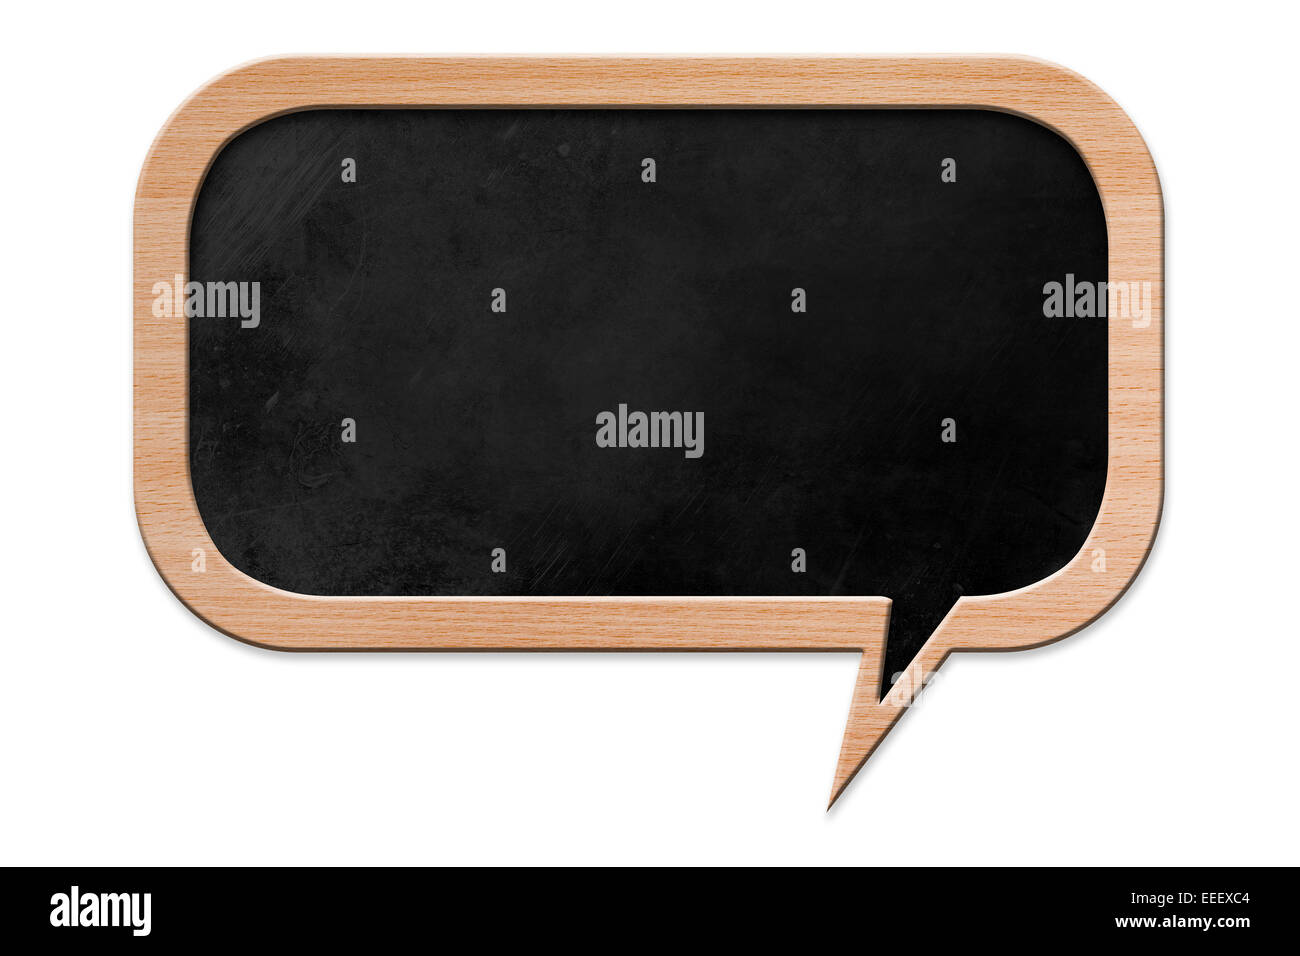 Blackboard in speech bubble shape with wooden frame, isolated on white backround Stock Photo